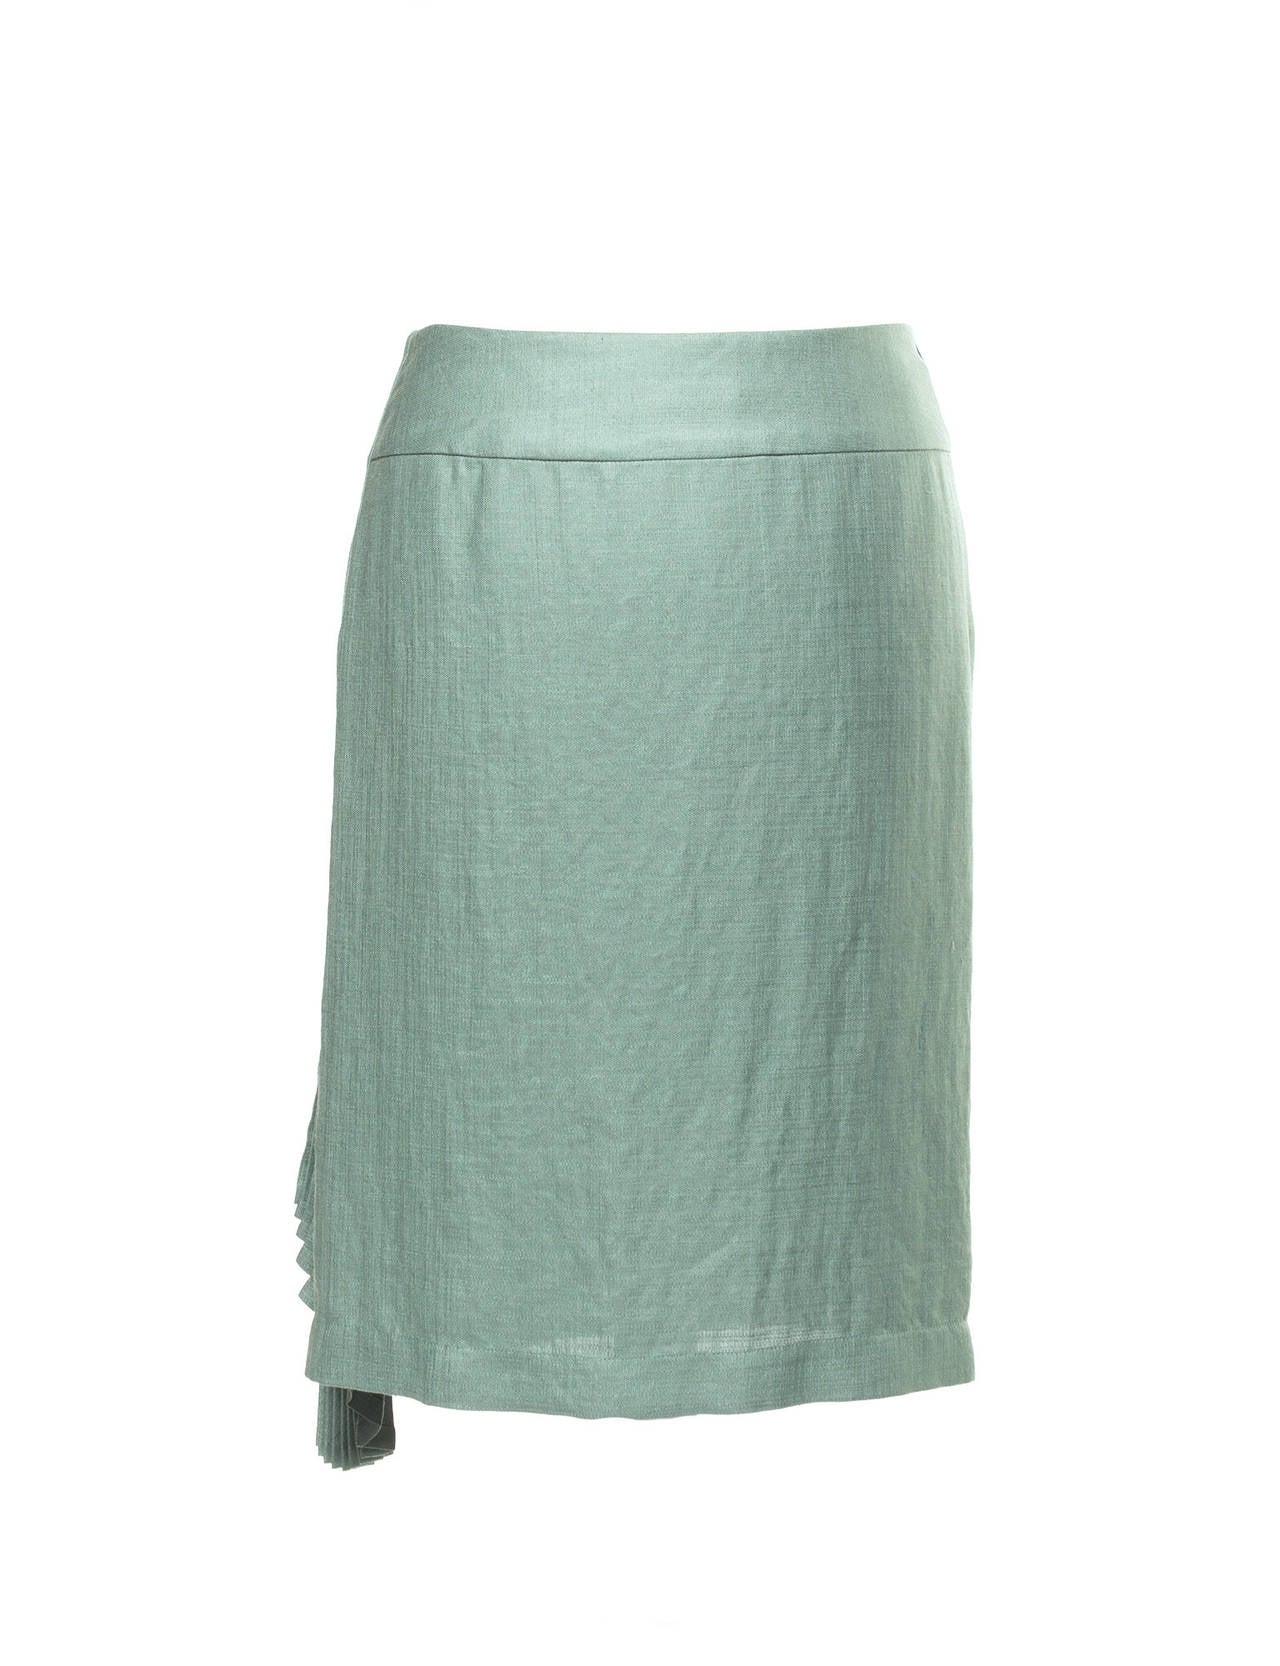 Vintage 90's Issey Miyake Celadon Green Skirt with pleated front detail ...